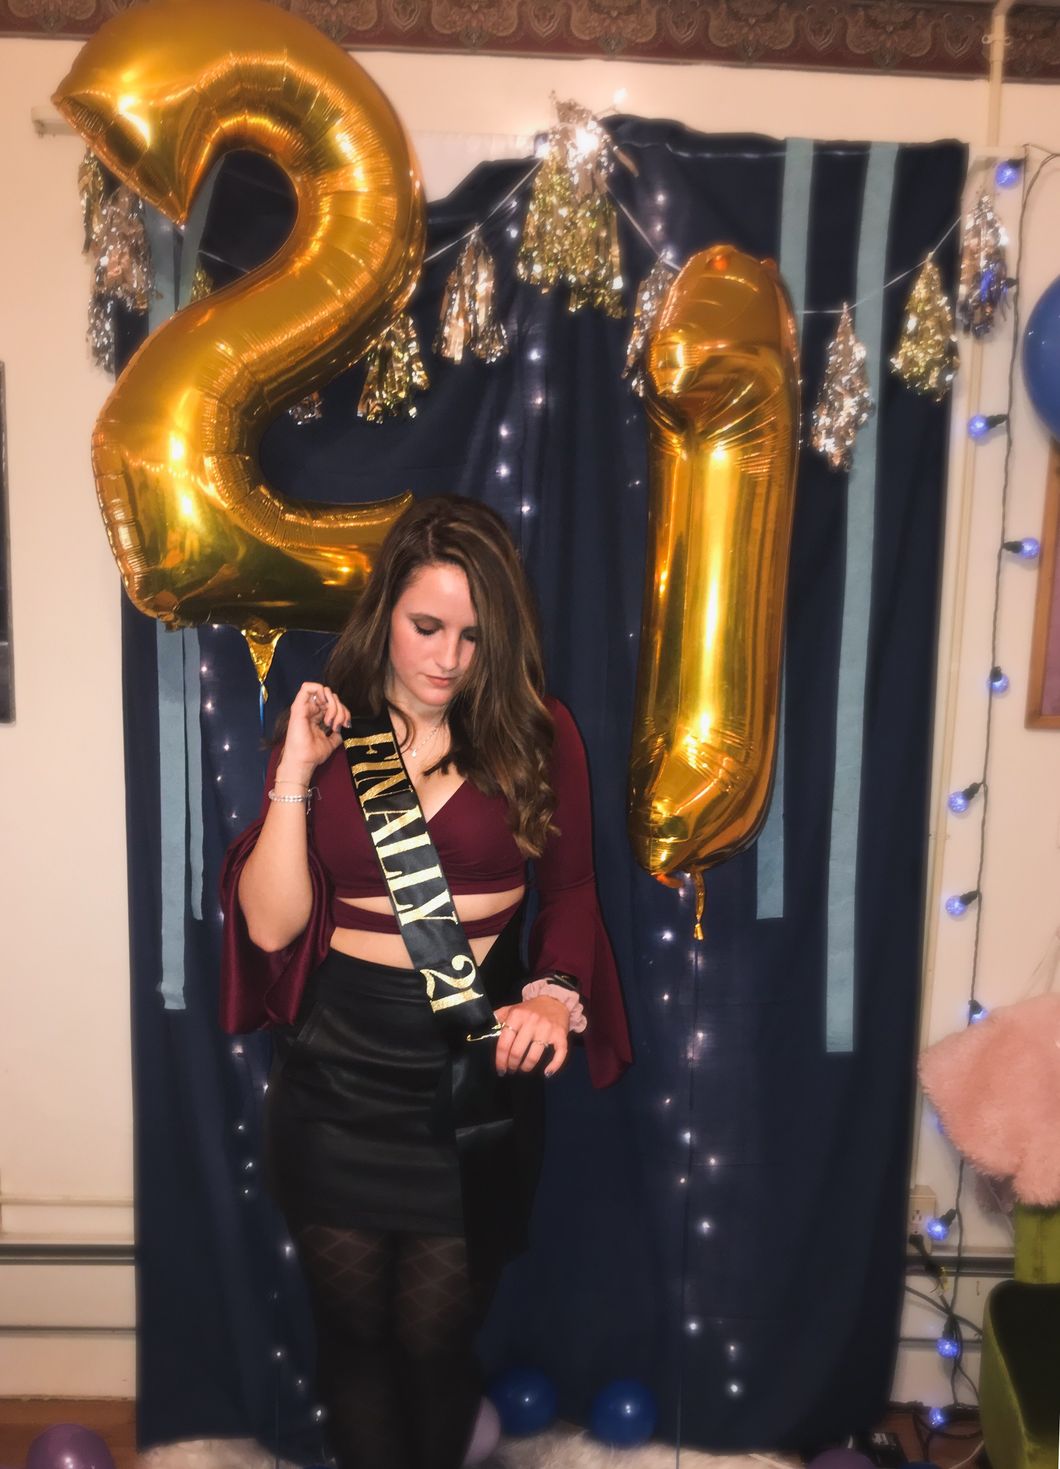 I Didn't 'Drink To Forget' My 21st Birthday, And I Couldn't Be Happier About That